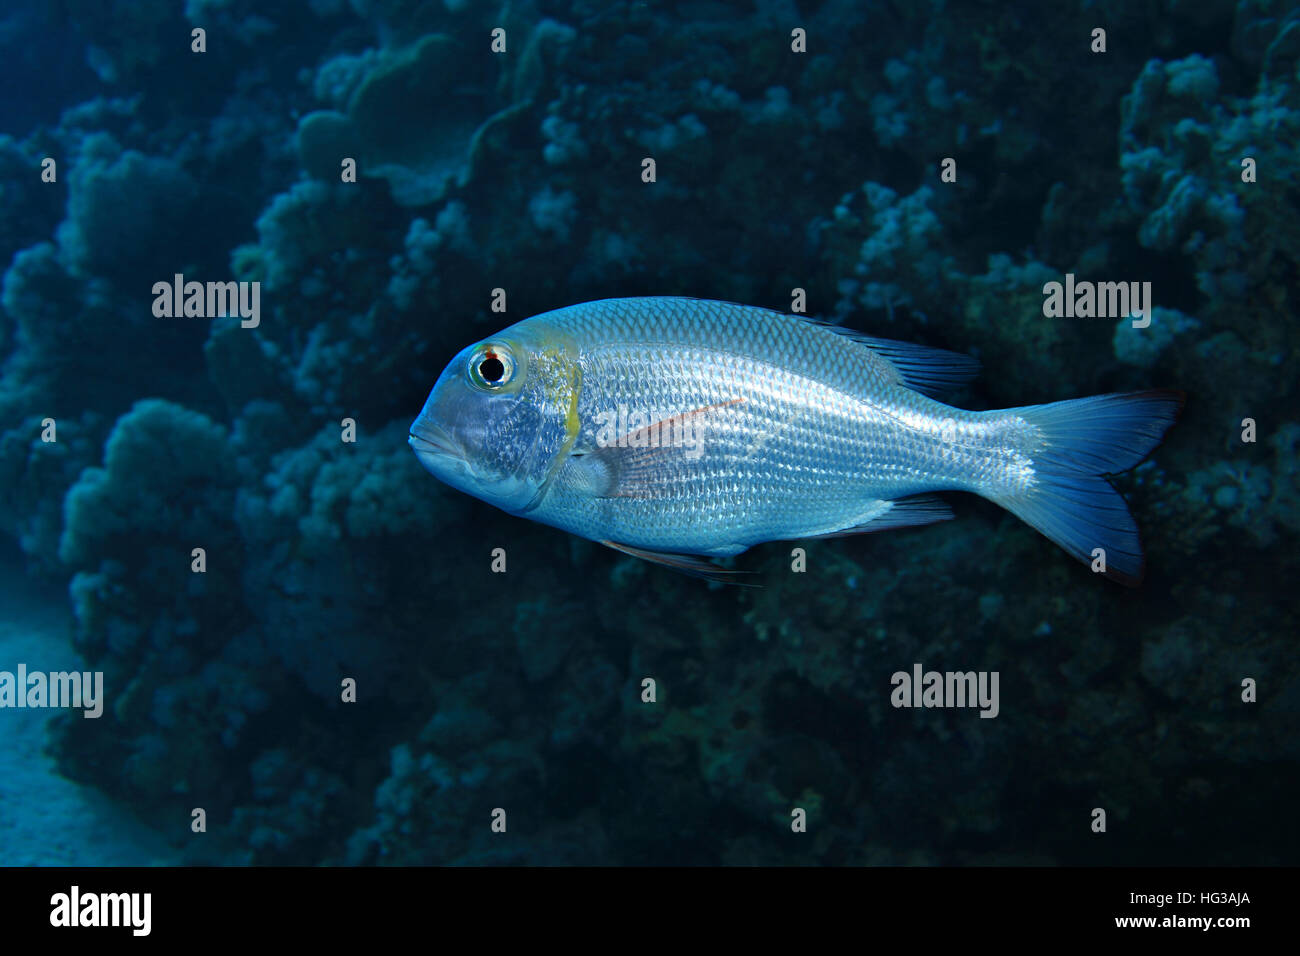 Bigeye emperor fish (Monotaxis grandoculis) underwater in the tropical reef of the red sea Stock Photo